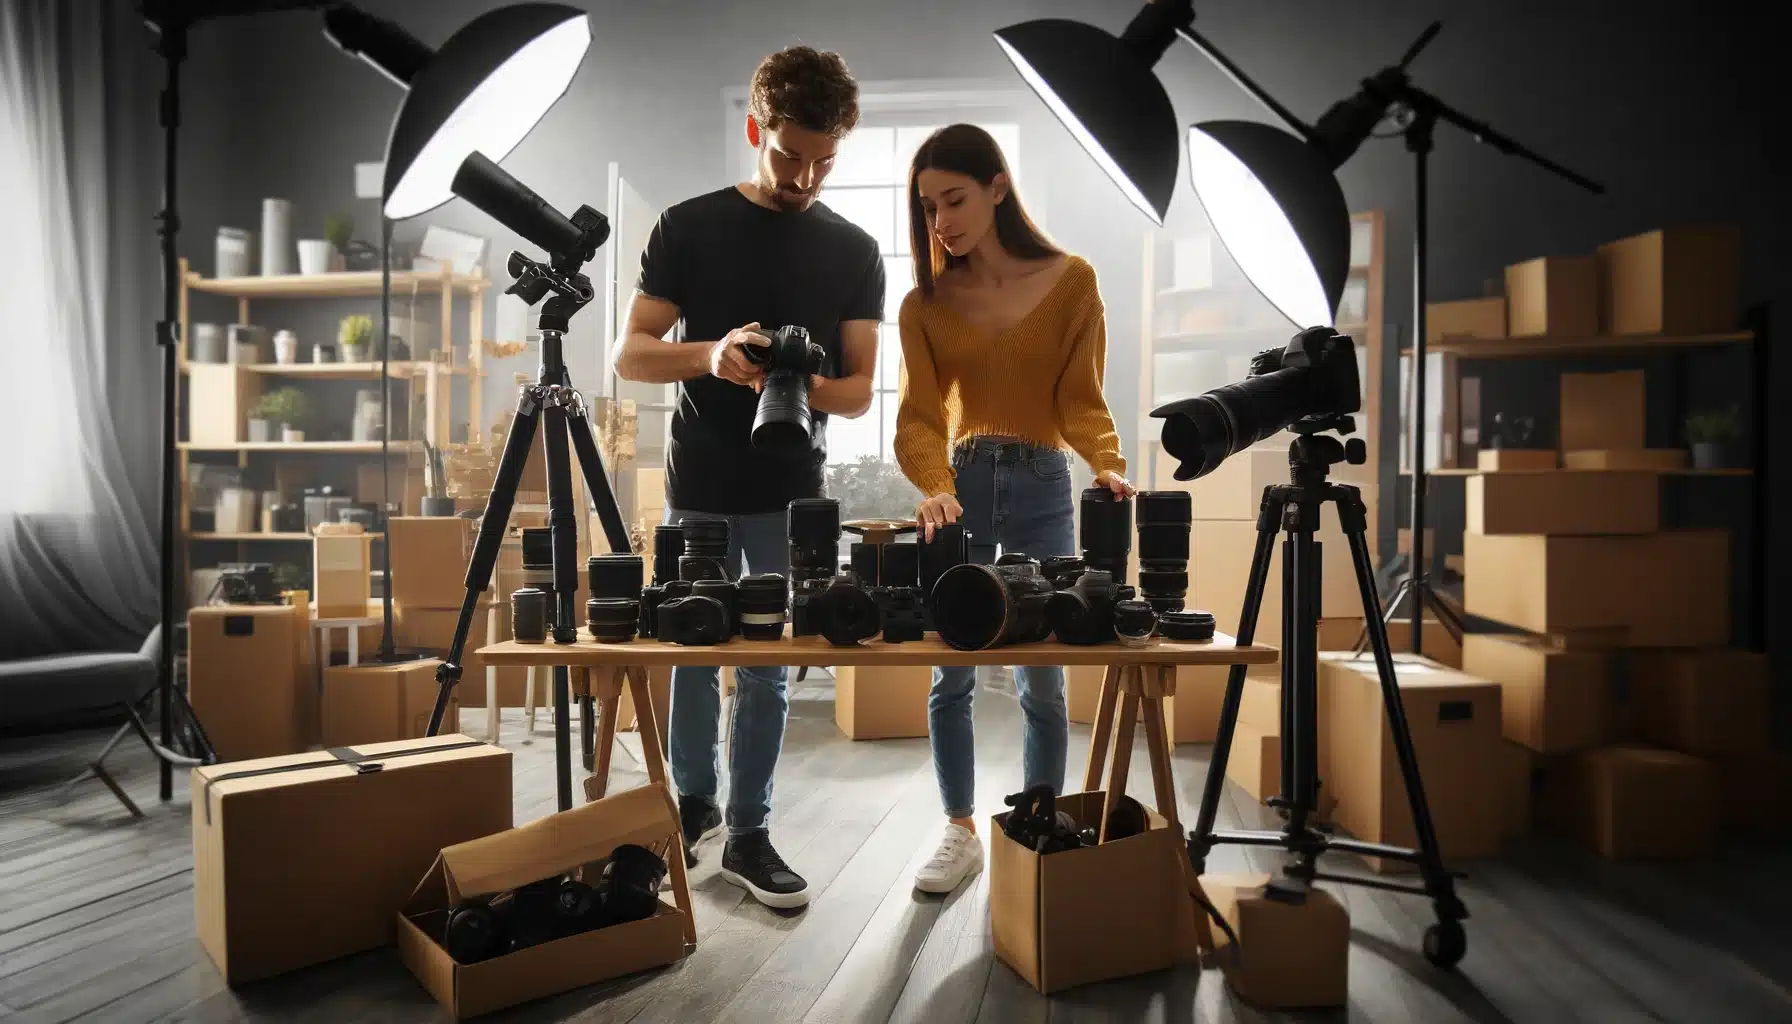 Two people checking photography equipment in a studio setting. The equipment includes professional cameras, tripods, lighting setups, and lenses.